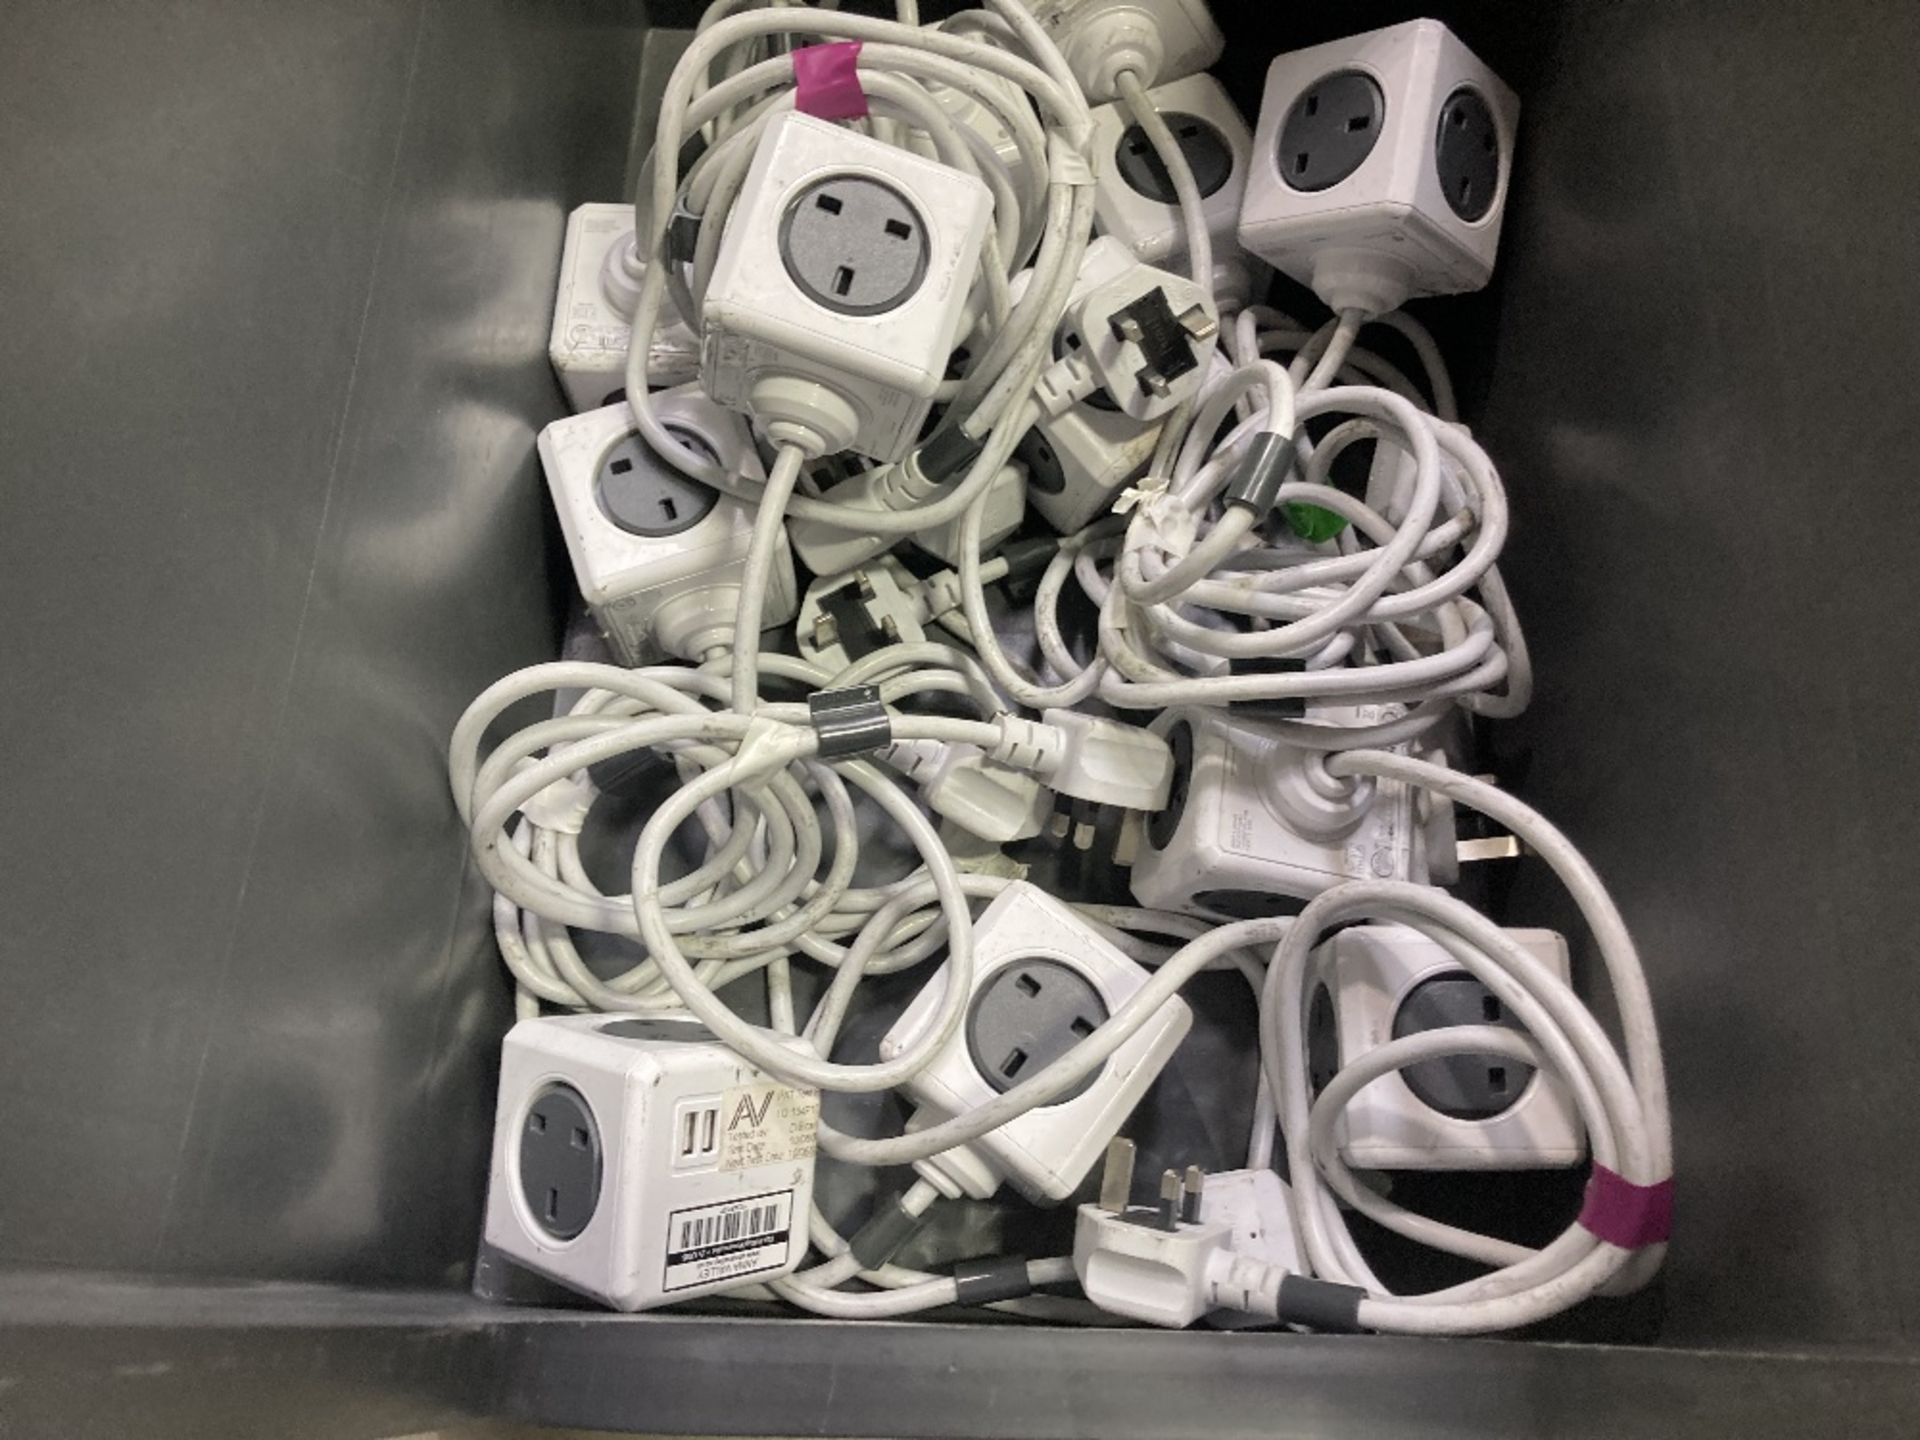 Large Quantity Of 13amp 4-Way Powercube + 2x USB Cable Adapters With Plastic Lin Bins - Image 2 of 8